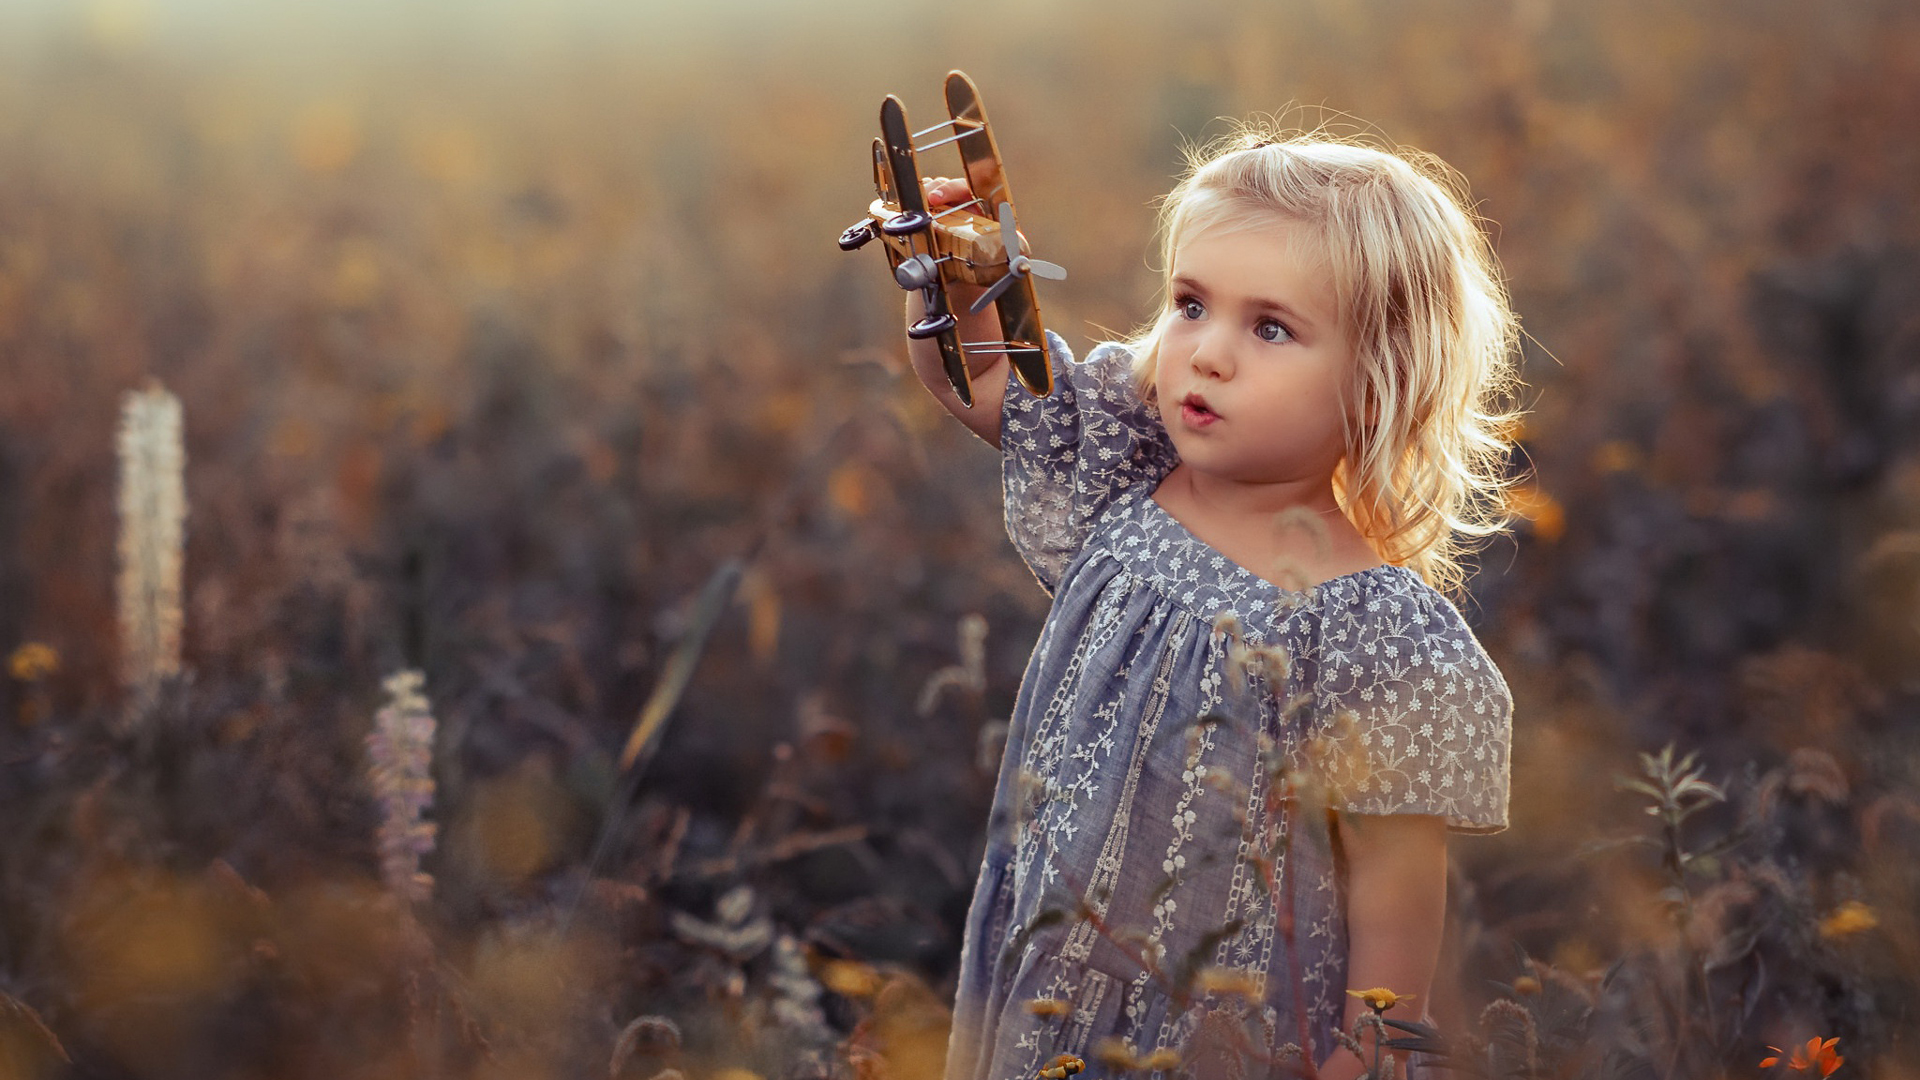 Cute Little Girl Is Standing In The Middle Of Flowers Field Wearing Printed Frock Playing With Toy 2K Cute